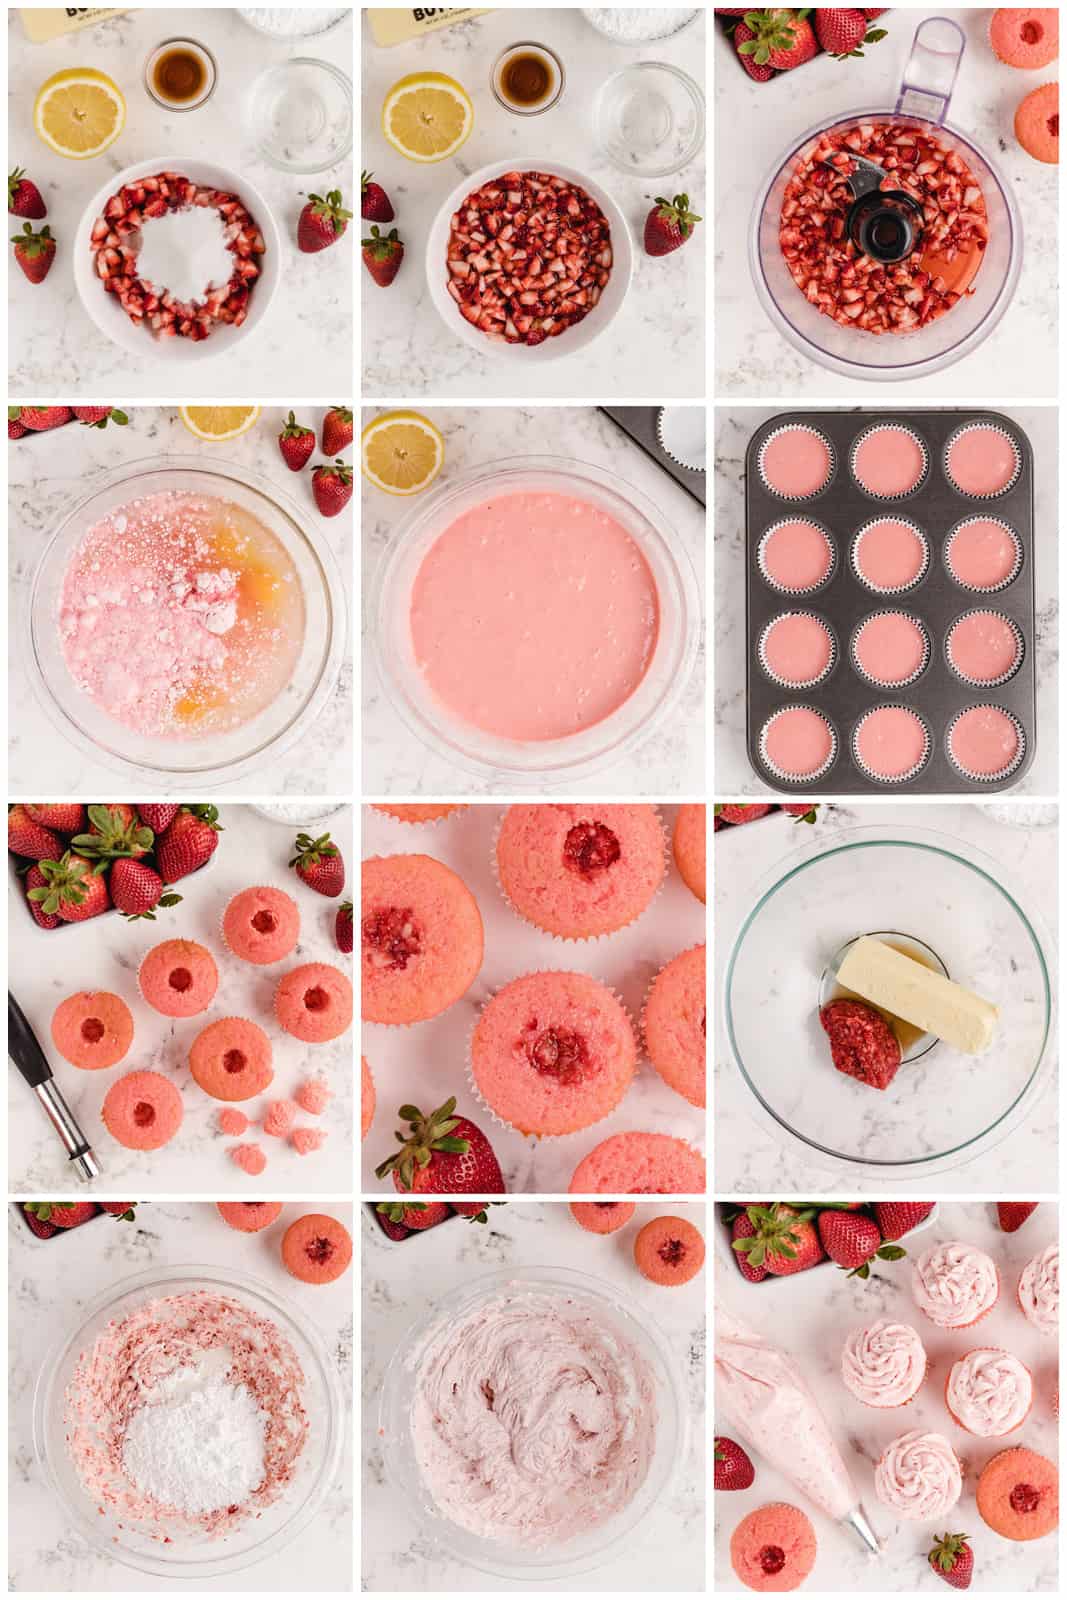 Step by step photos on how to make Strawberry Cupcakes